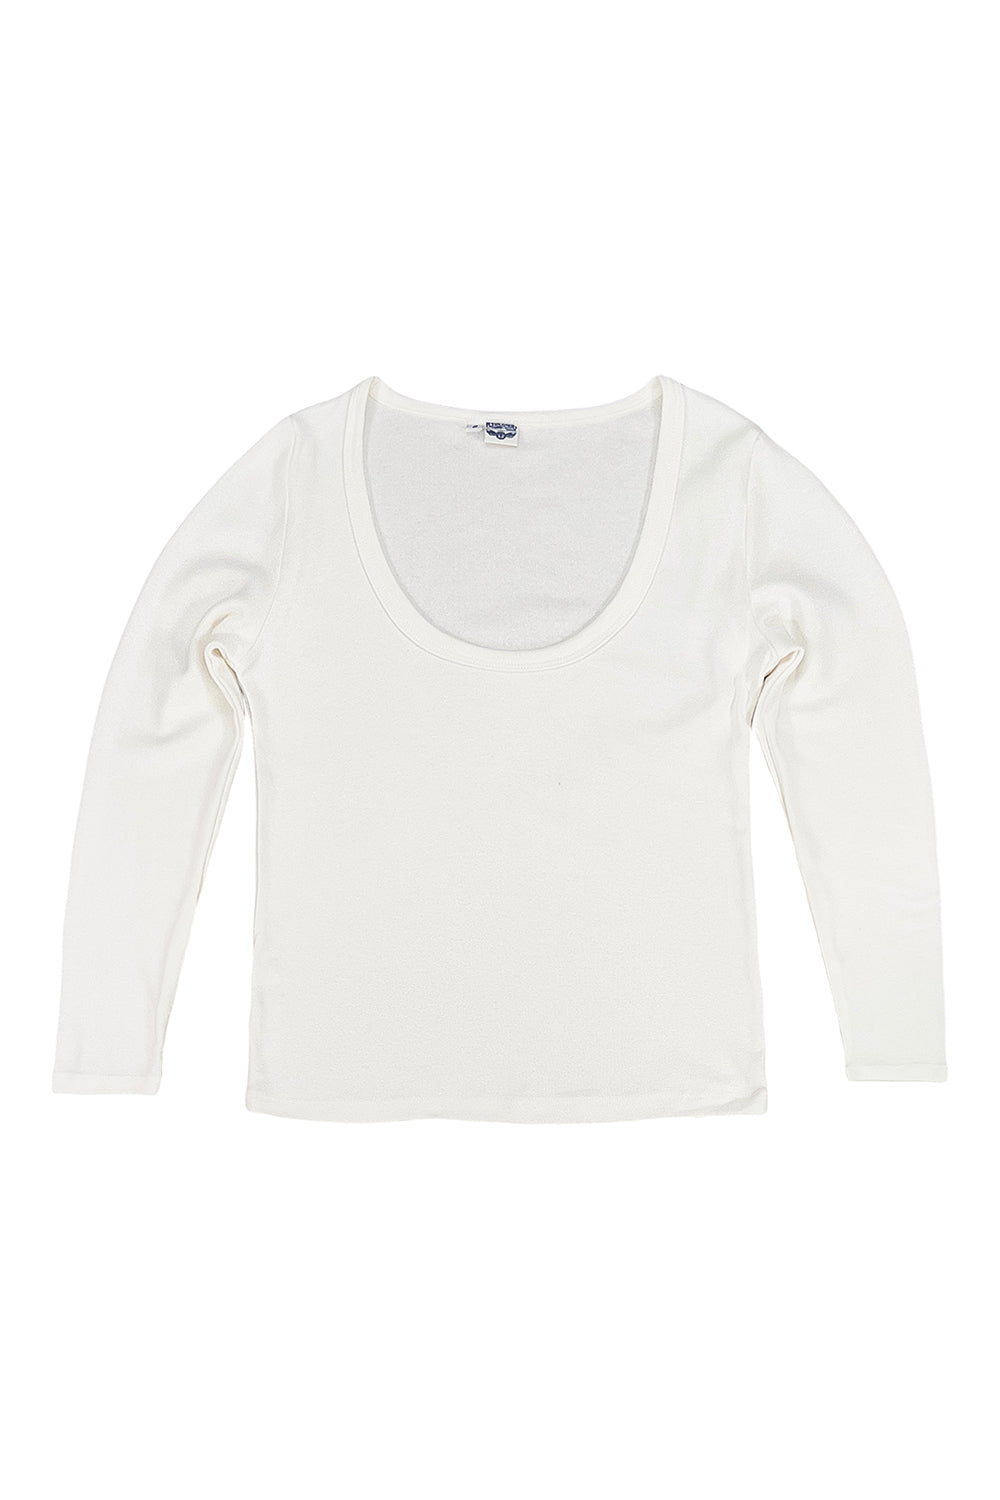 Paseo Long Sleeve Tee | Jungmaven Hemp Clothing & Accessories / Color: Washed White